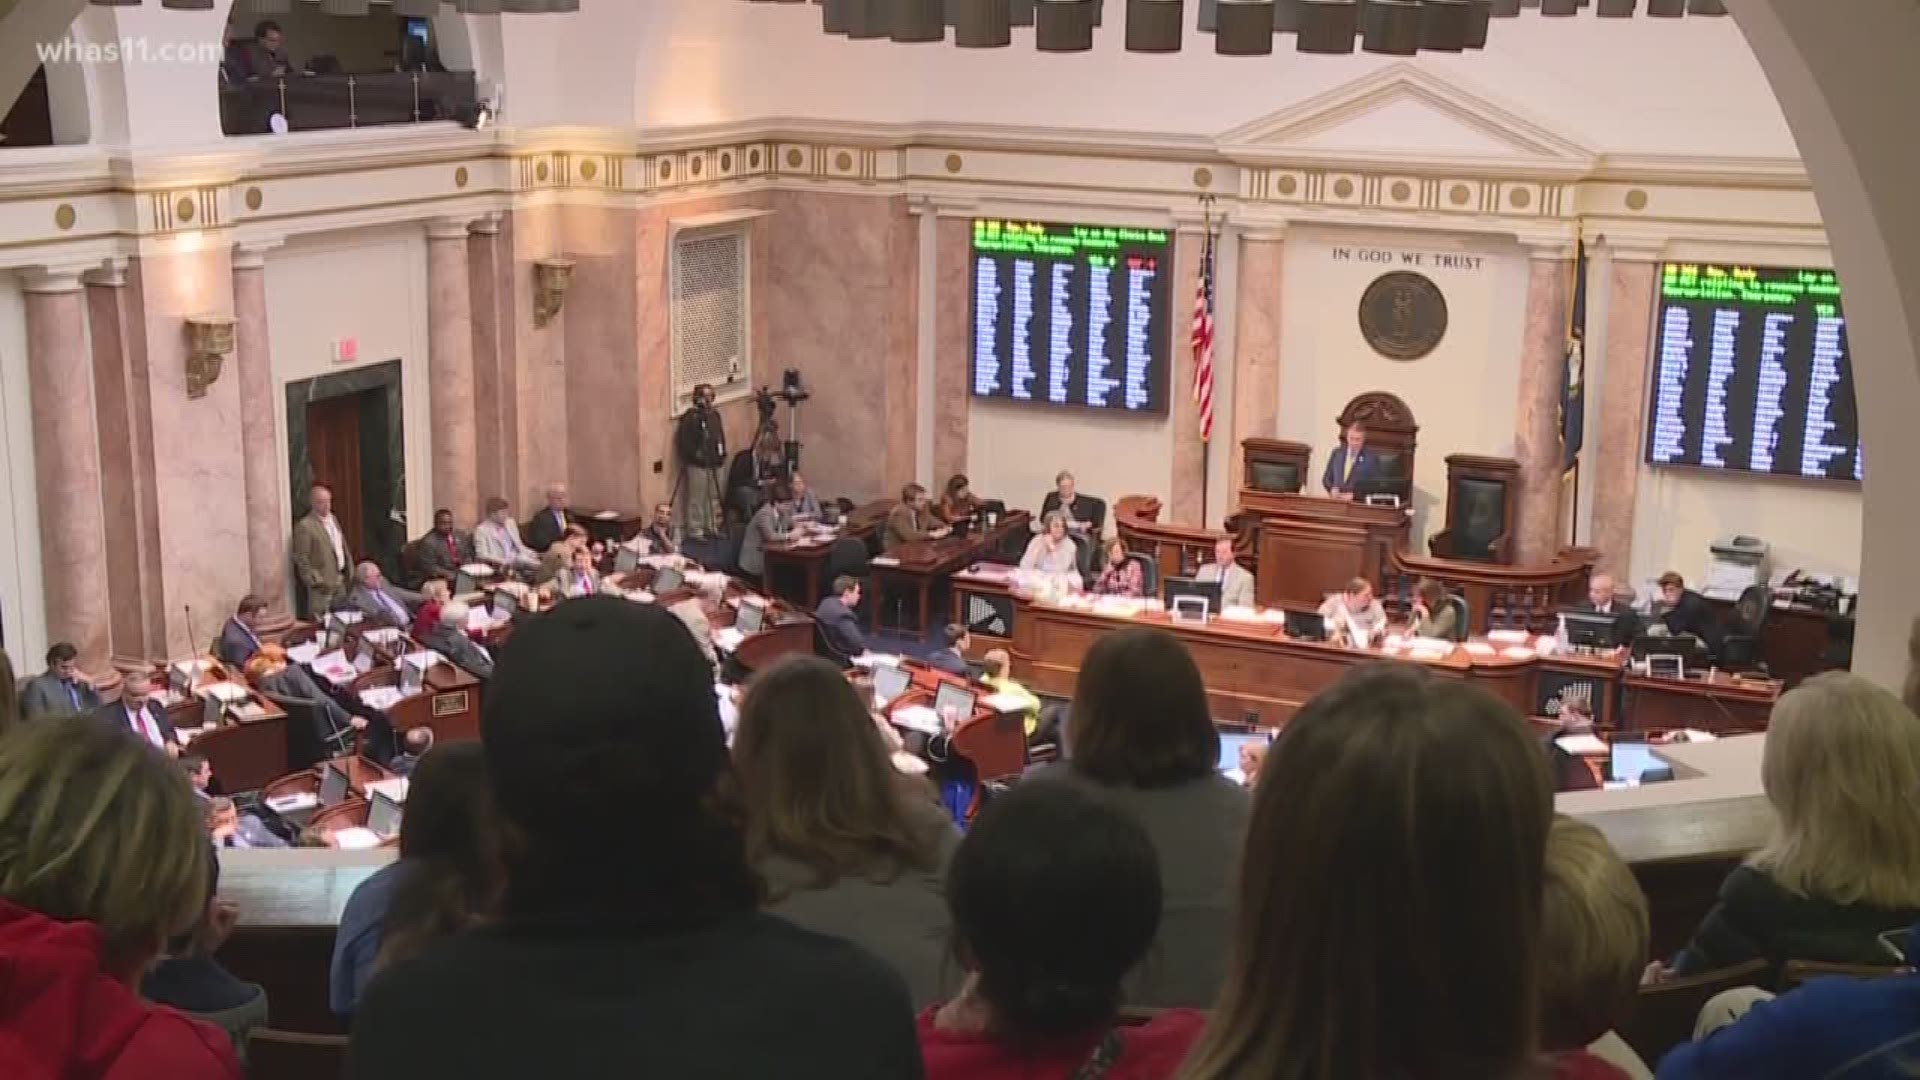 Kentucky House leaders said the governor's pension bill still doesn't have enough votes to pass their chamber, even with some changes that were revealed this week.